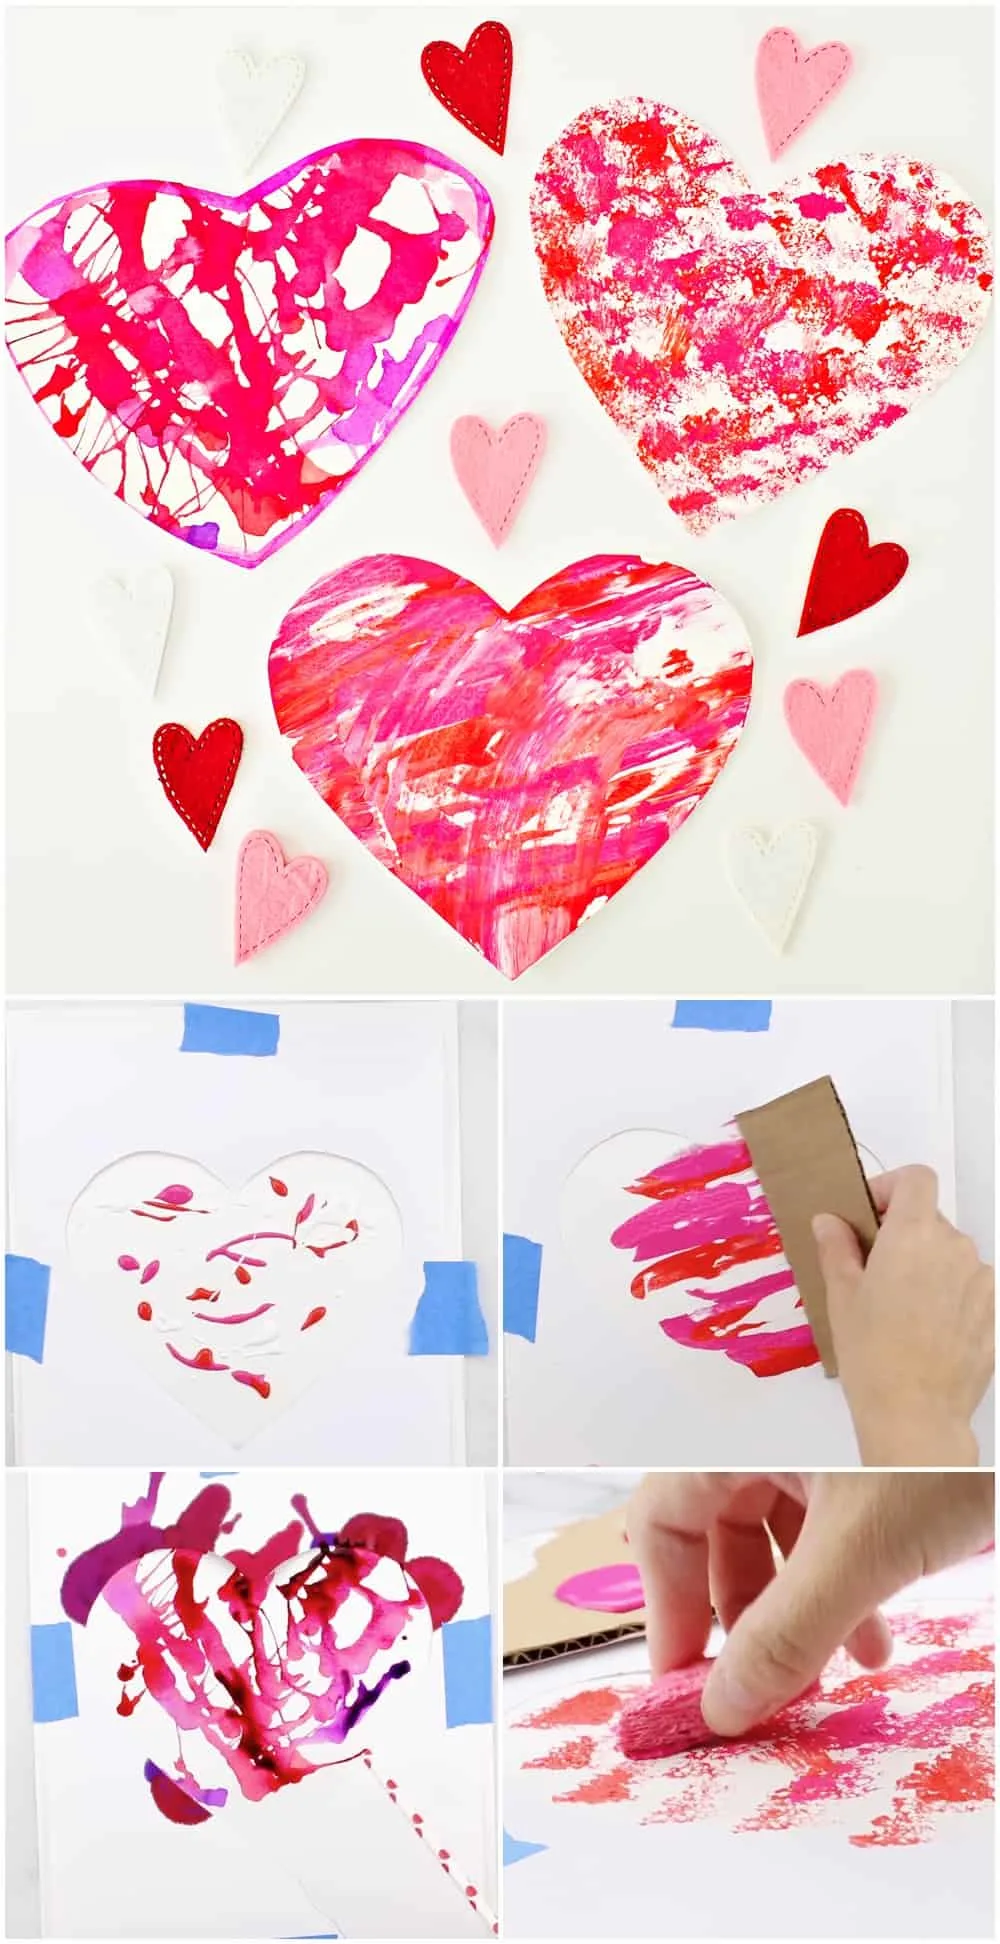 VALENTINE ART AND CRAFT PROJECT FOR KIDS